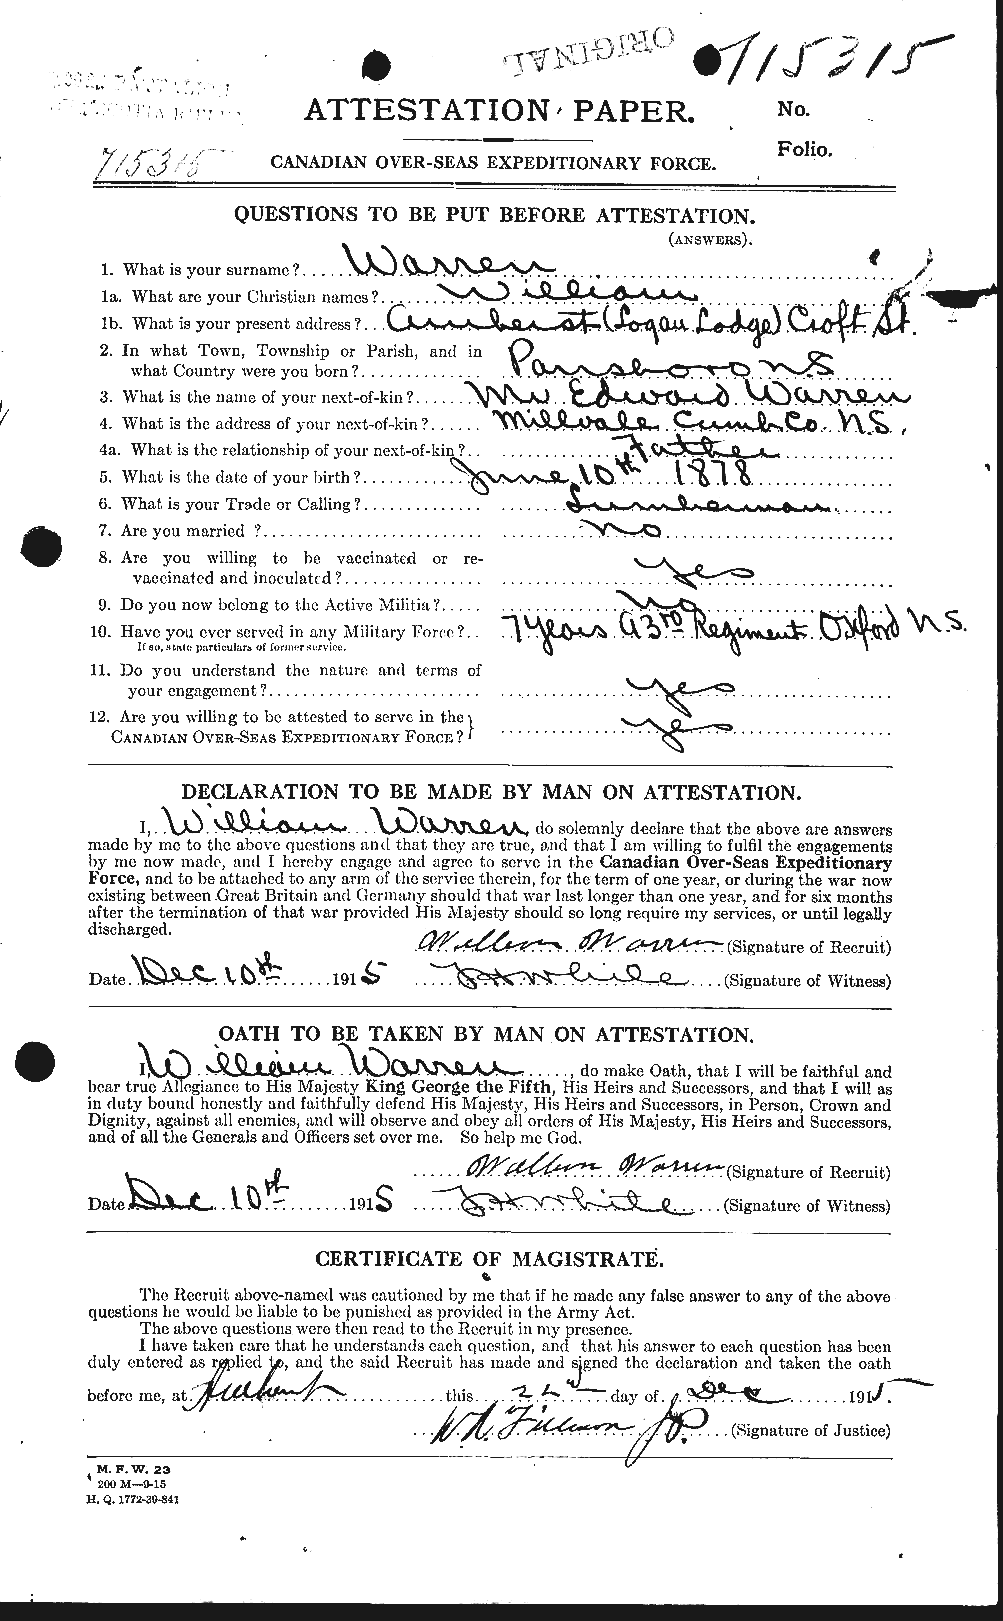 Personnel Records of the First World War - CEF 658677a